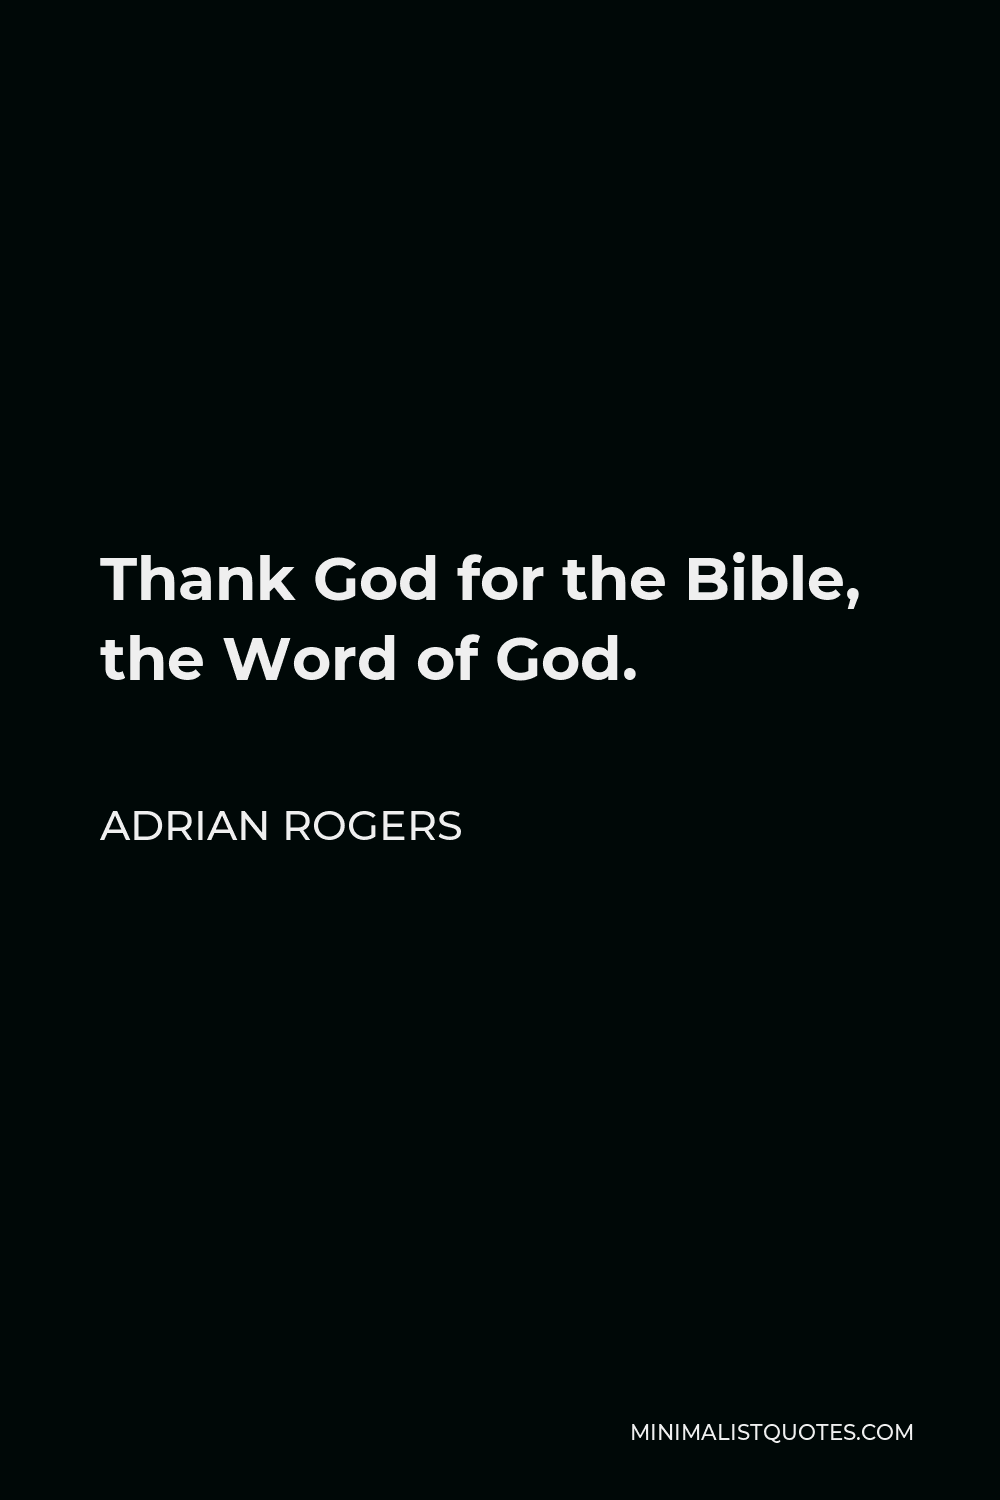 adrian-rogers-quote-thank-god-for-the-bible-the-word-of-god